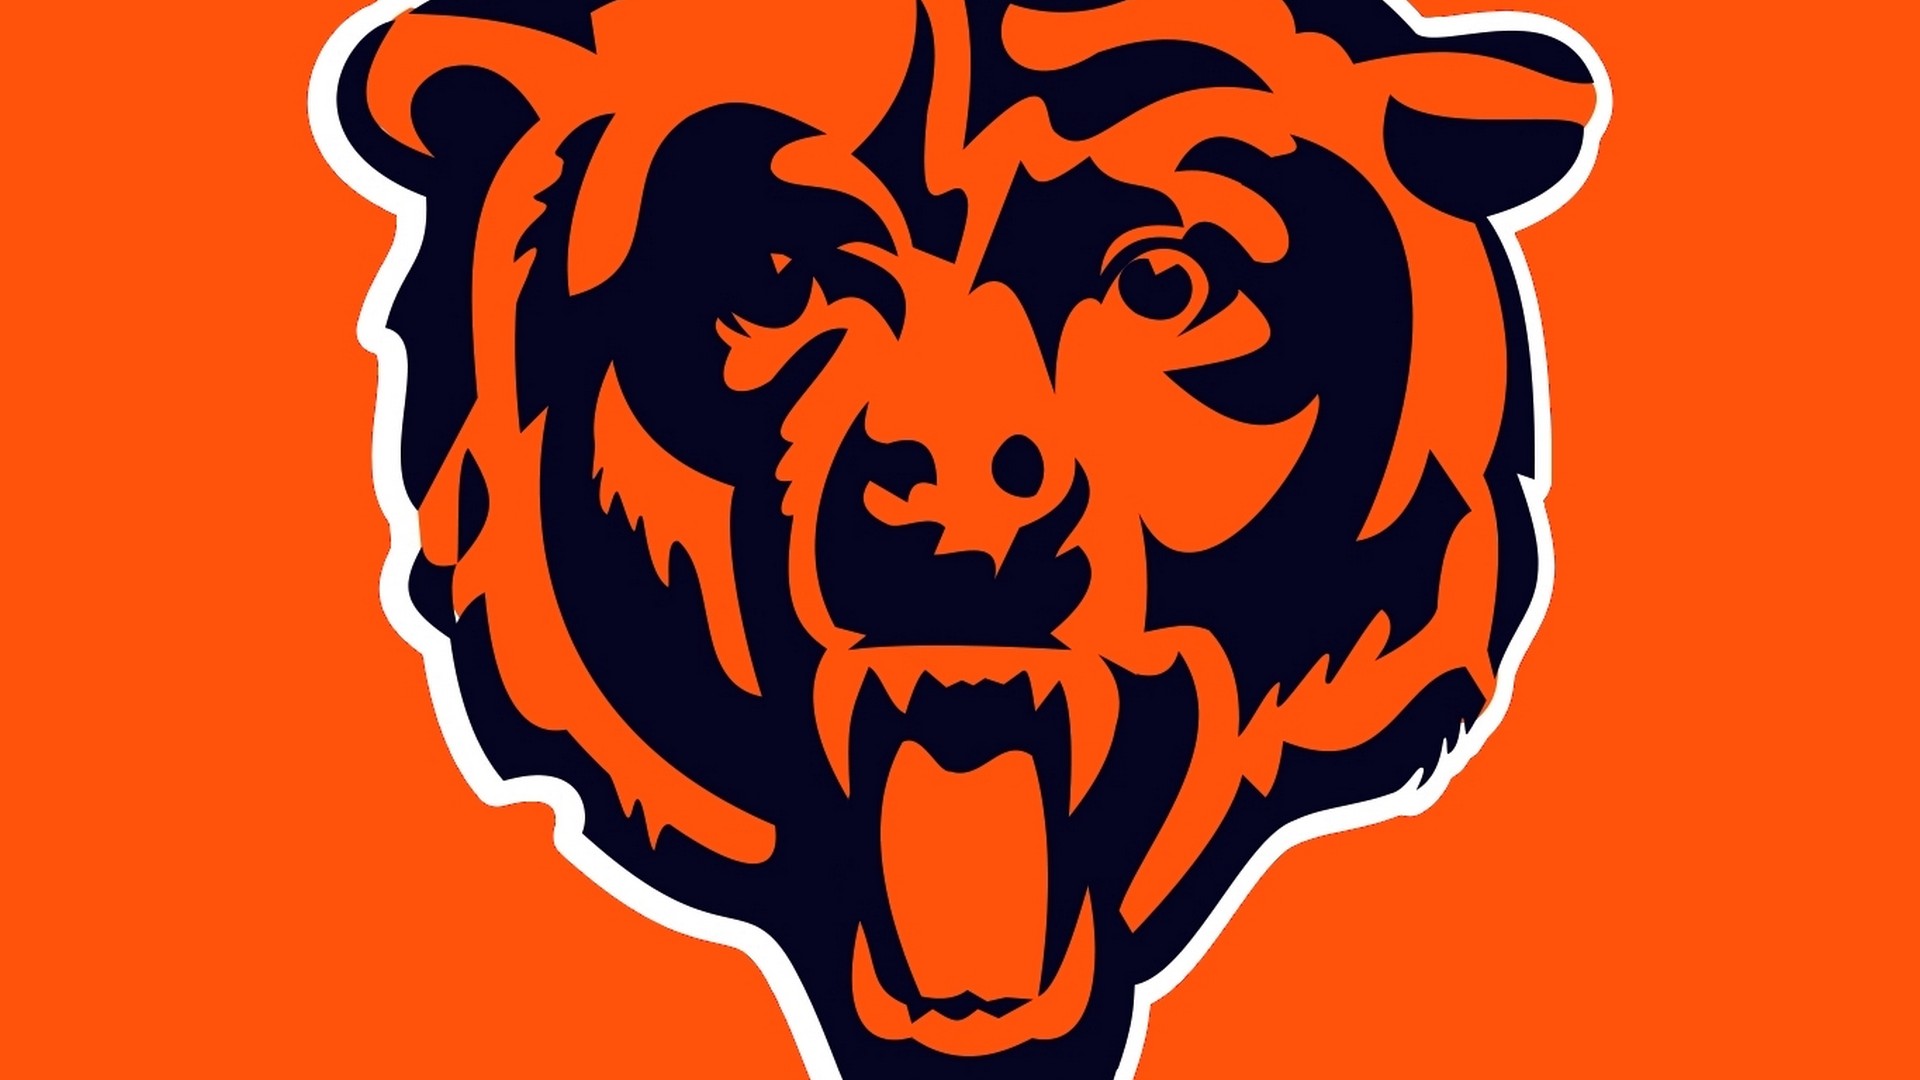 Windows Wallpaper Chicago Bears With Resolution 1920X1080